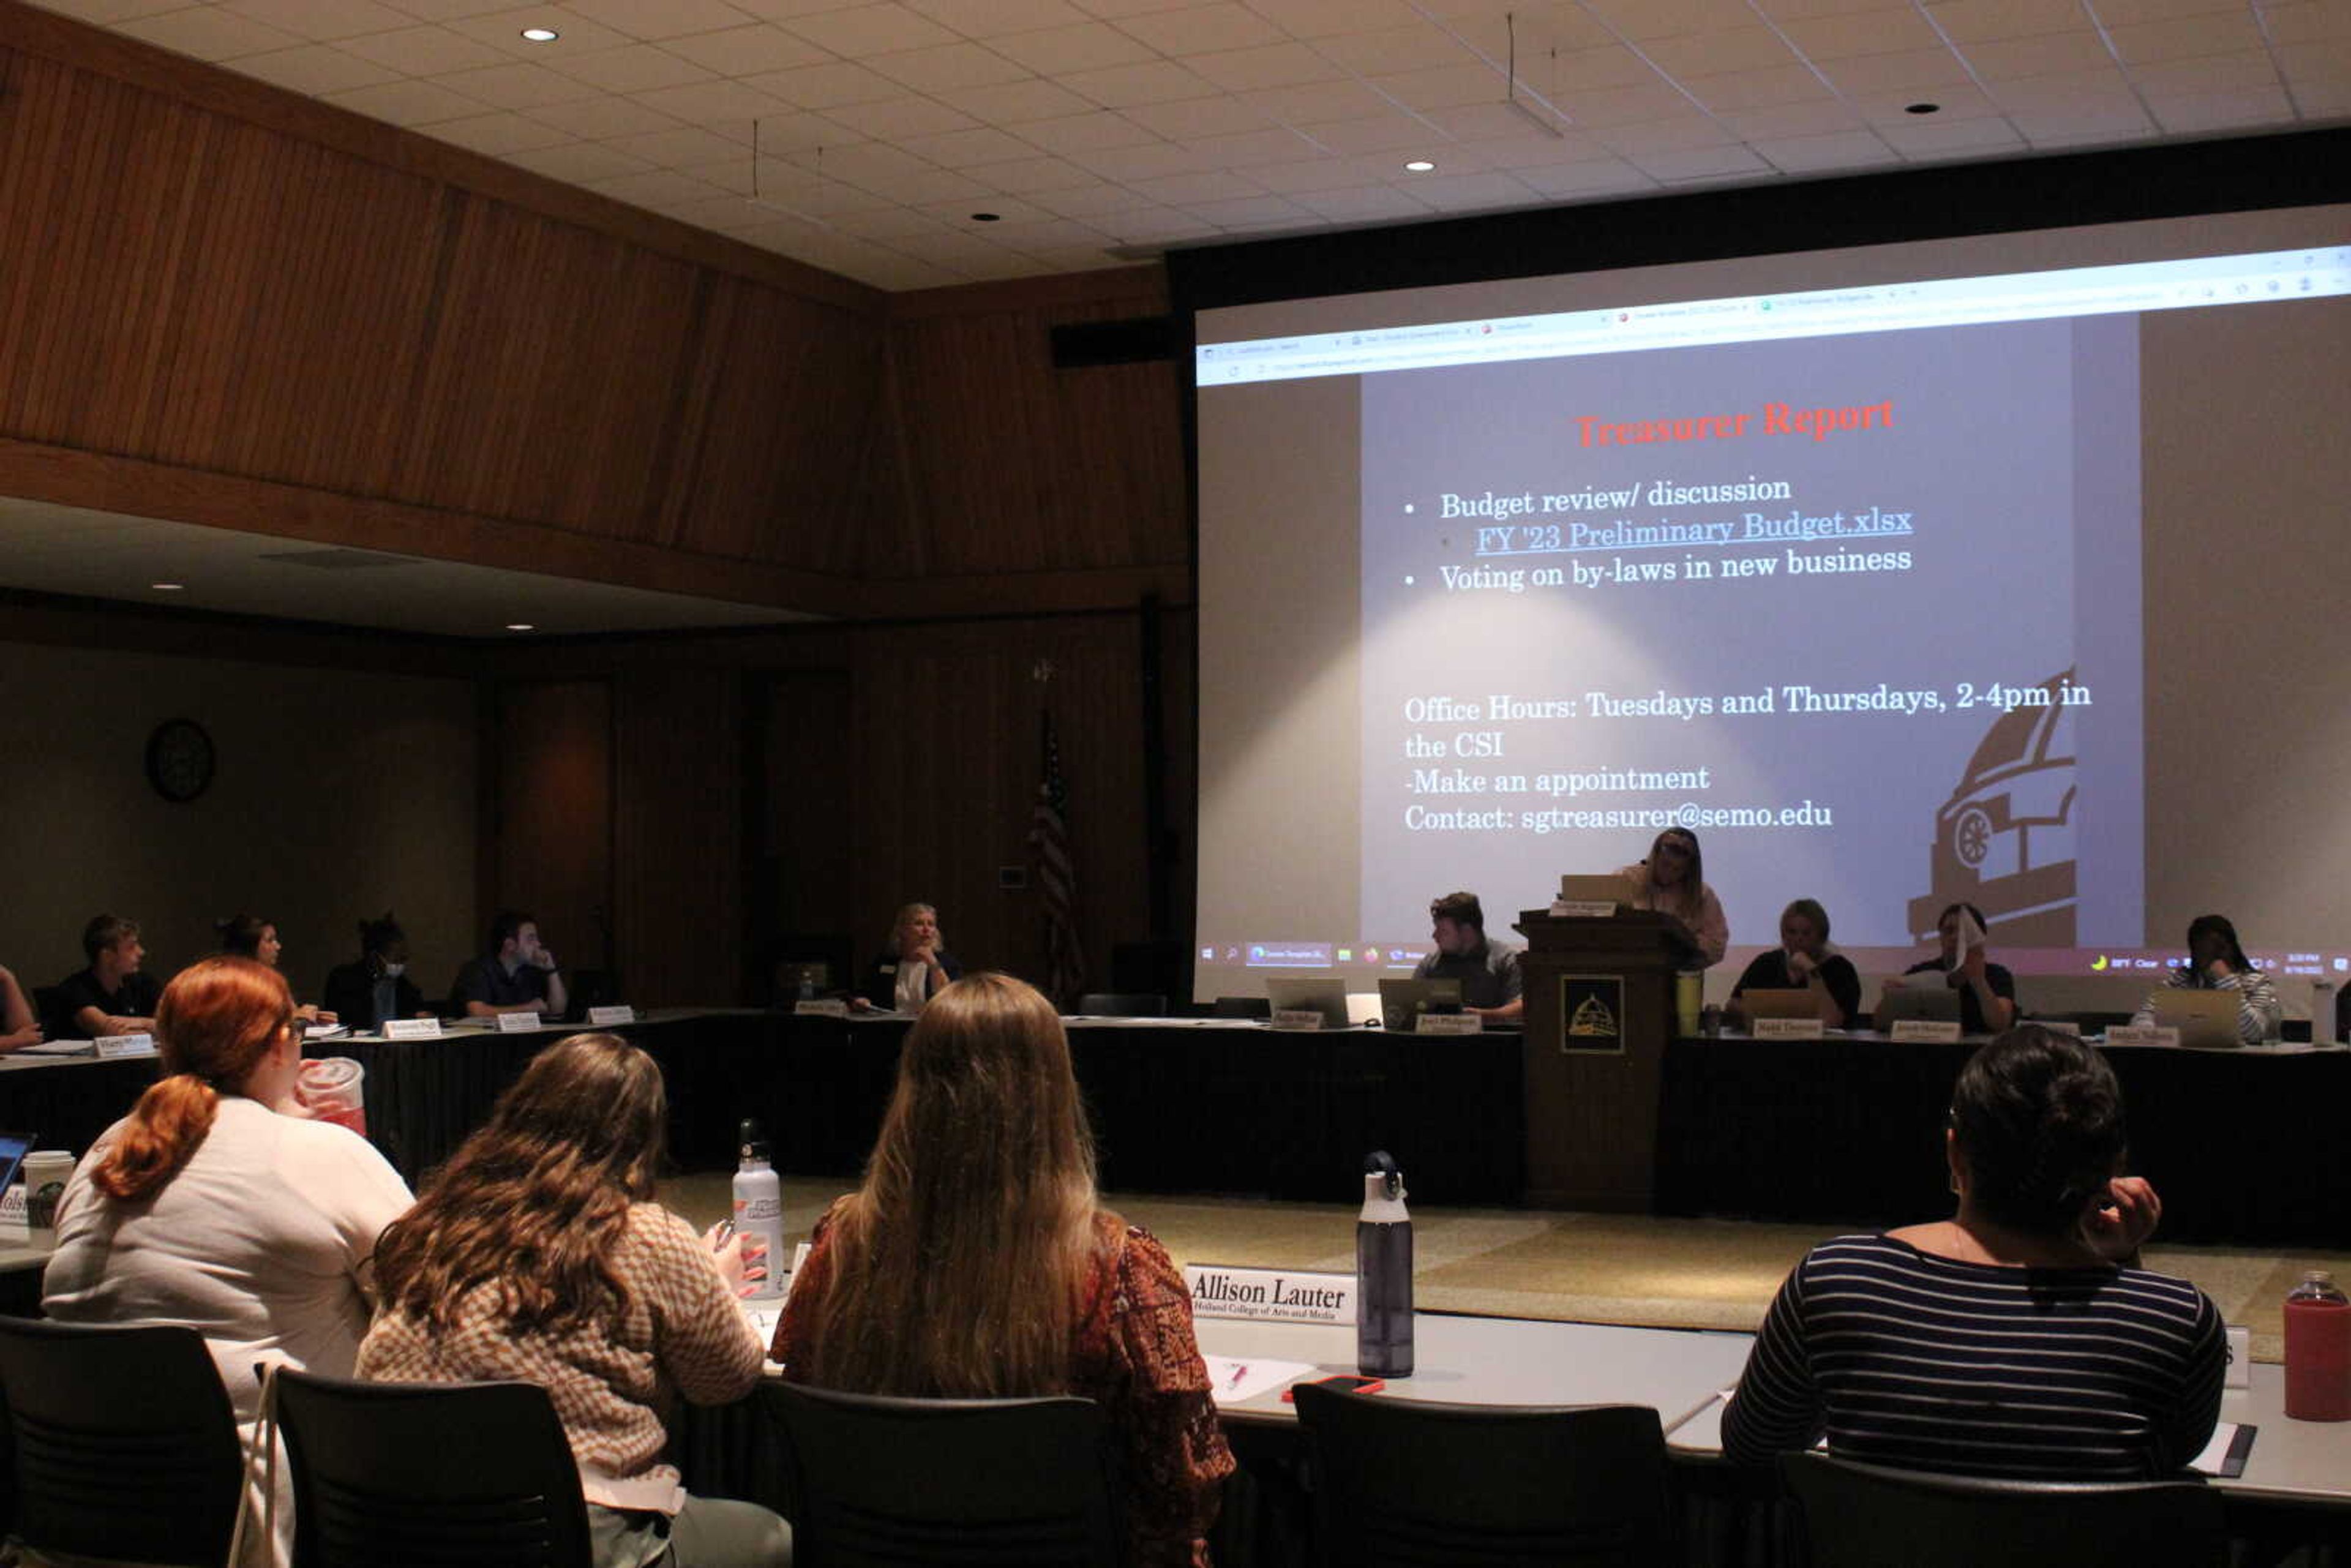 SGA met on Sept. 19 at the University Center. They discussed preliminary budgeting for student organizations, discretionary, and conference accounts for the '23 year.